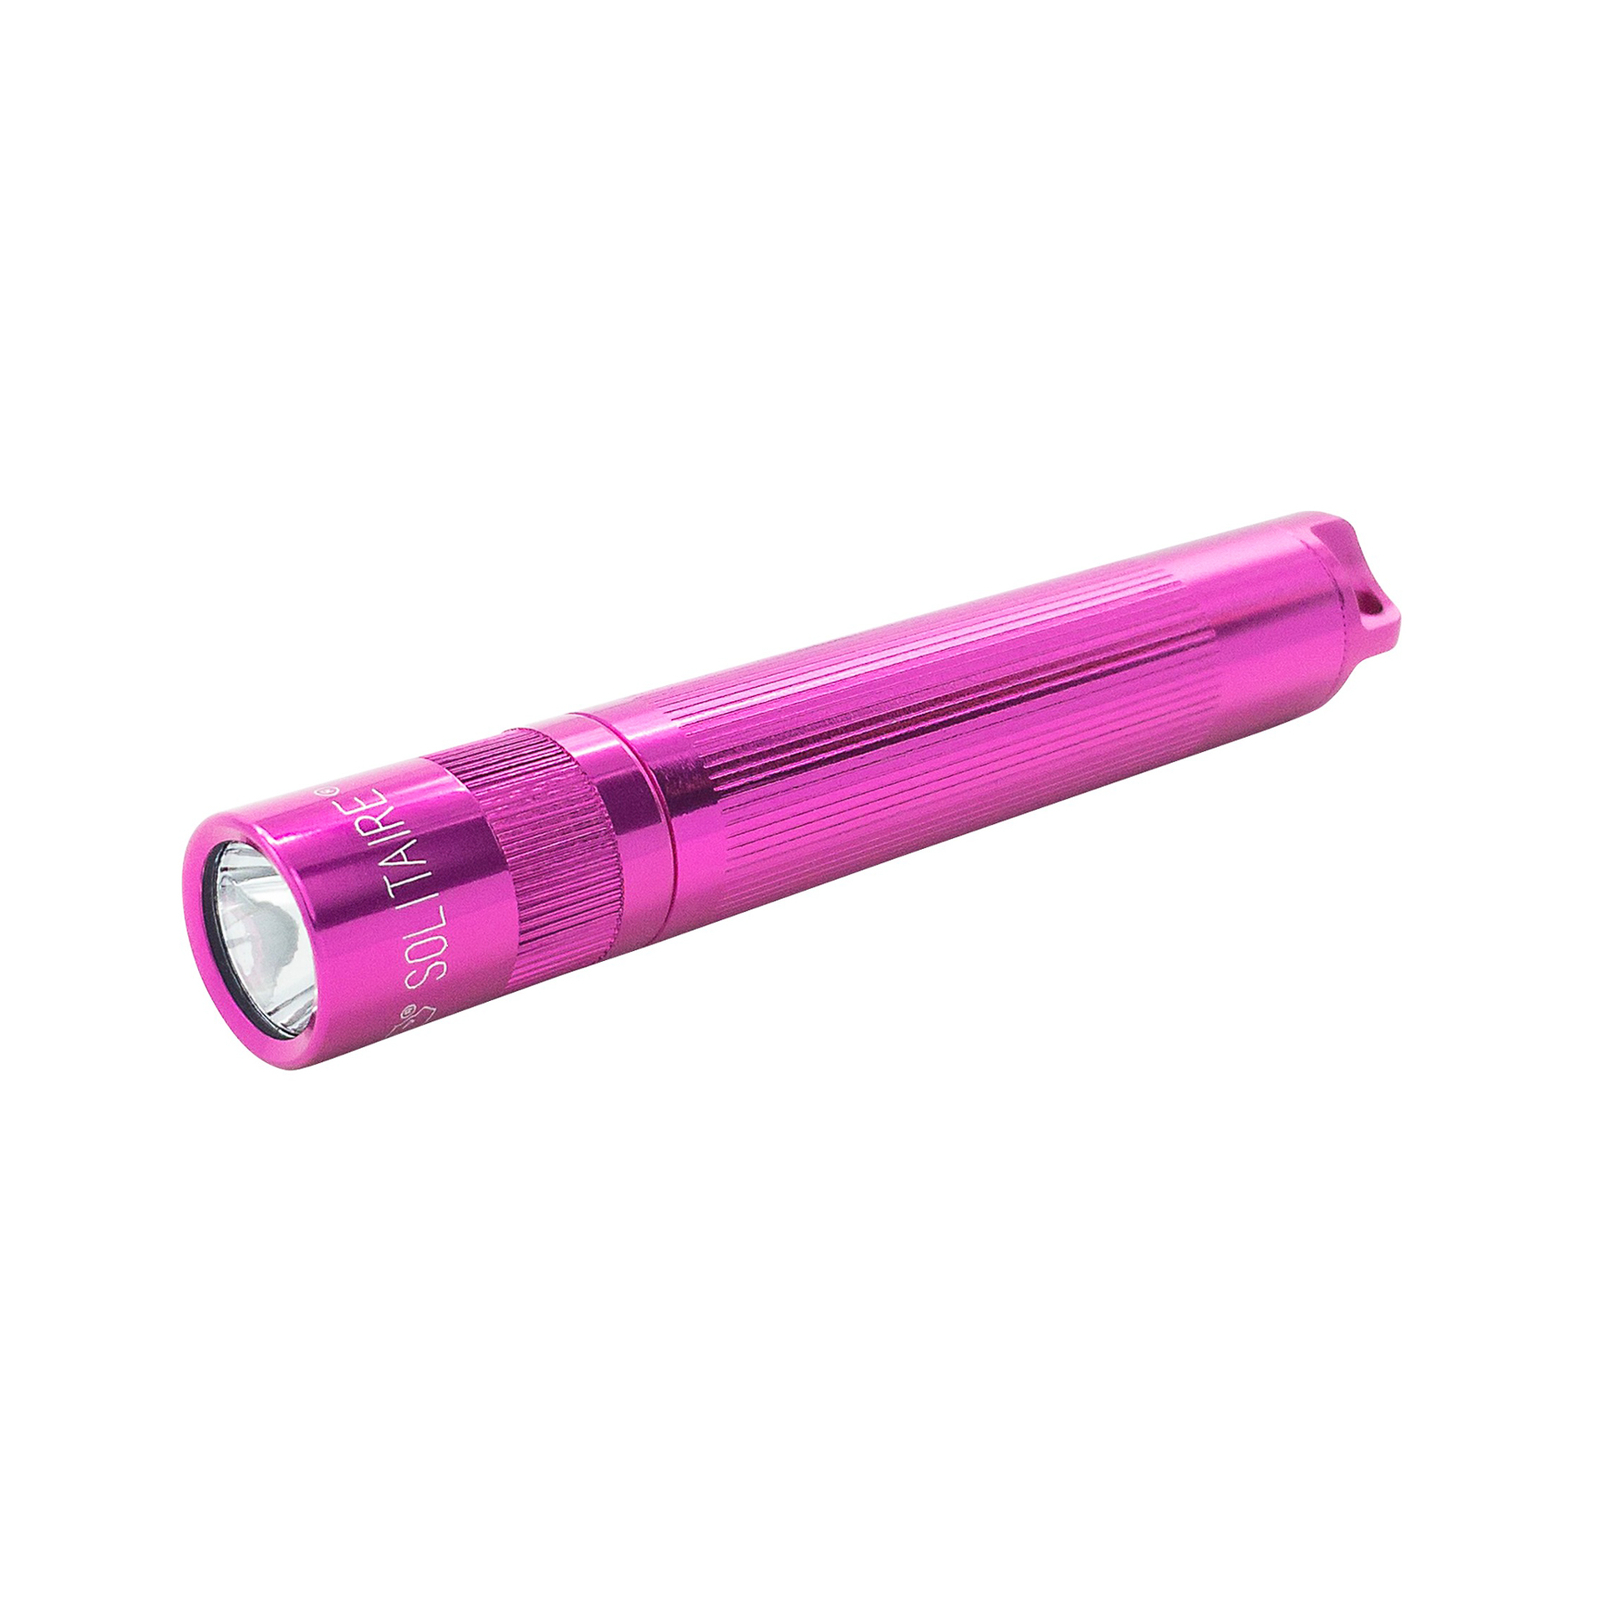 Maglite Xenon lommelygte Solitaire 1-Cell AAA, æske, pink